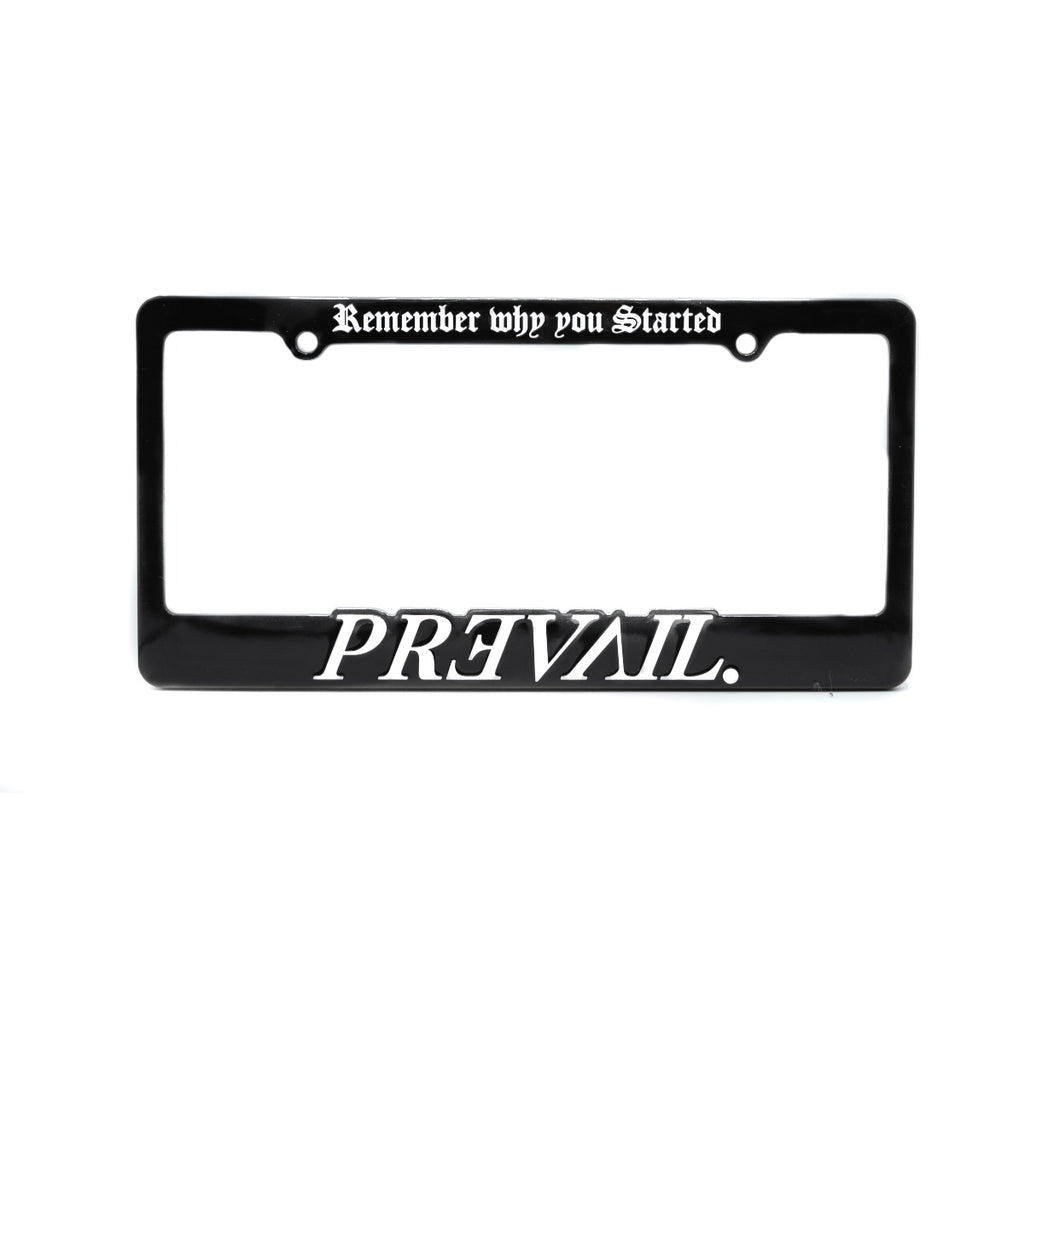 Pack of 2 Prevail License Plate Frame